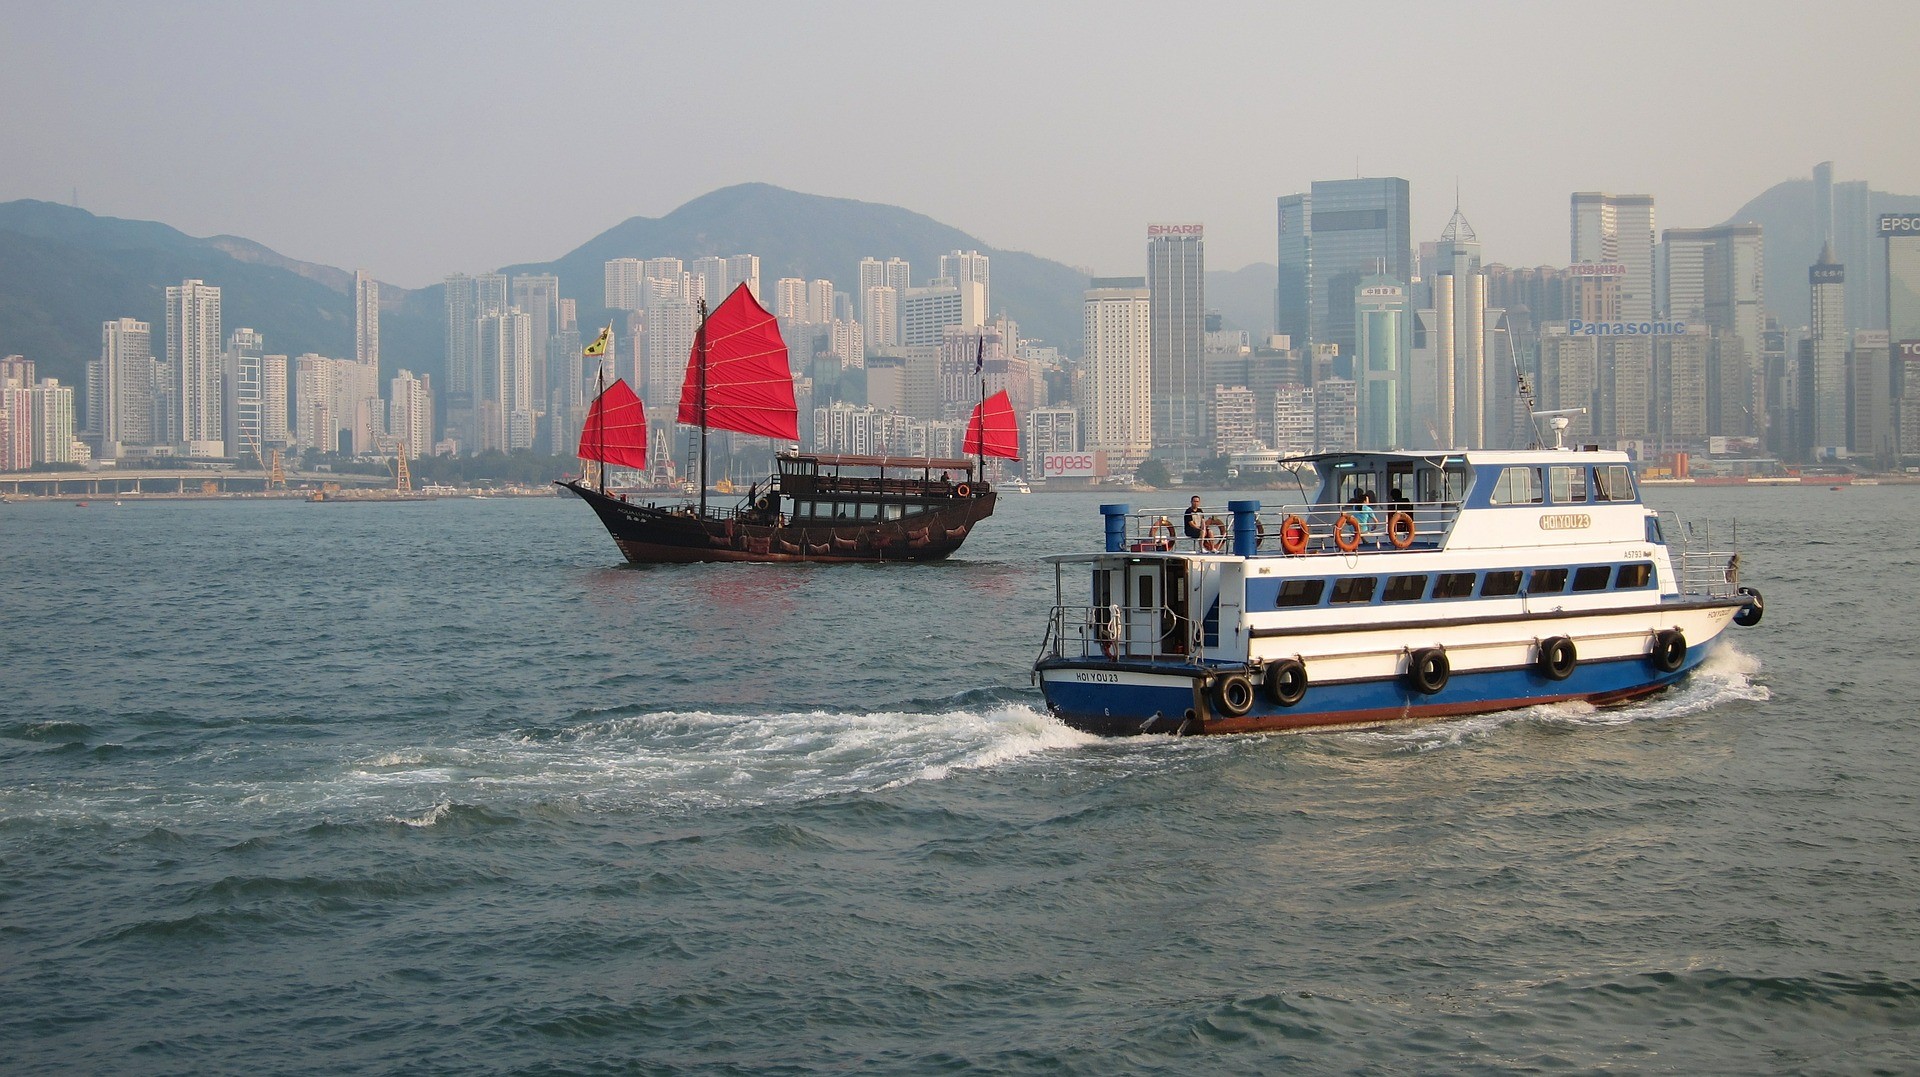 victoria harbour and sky100 hong kong